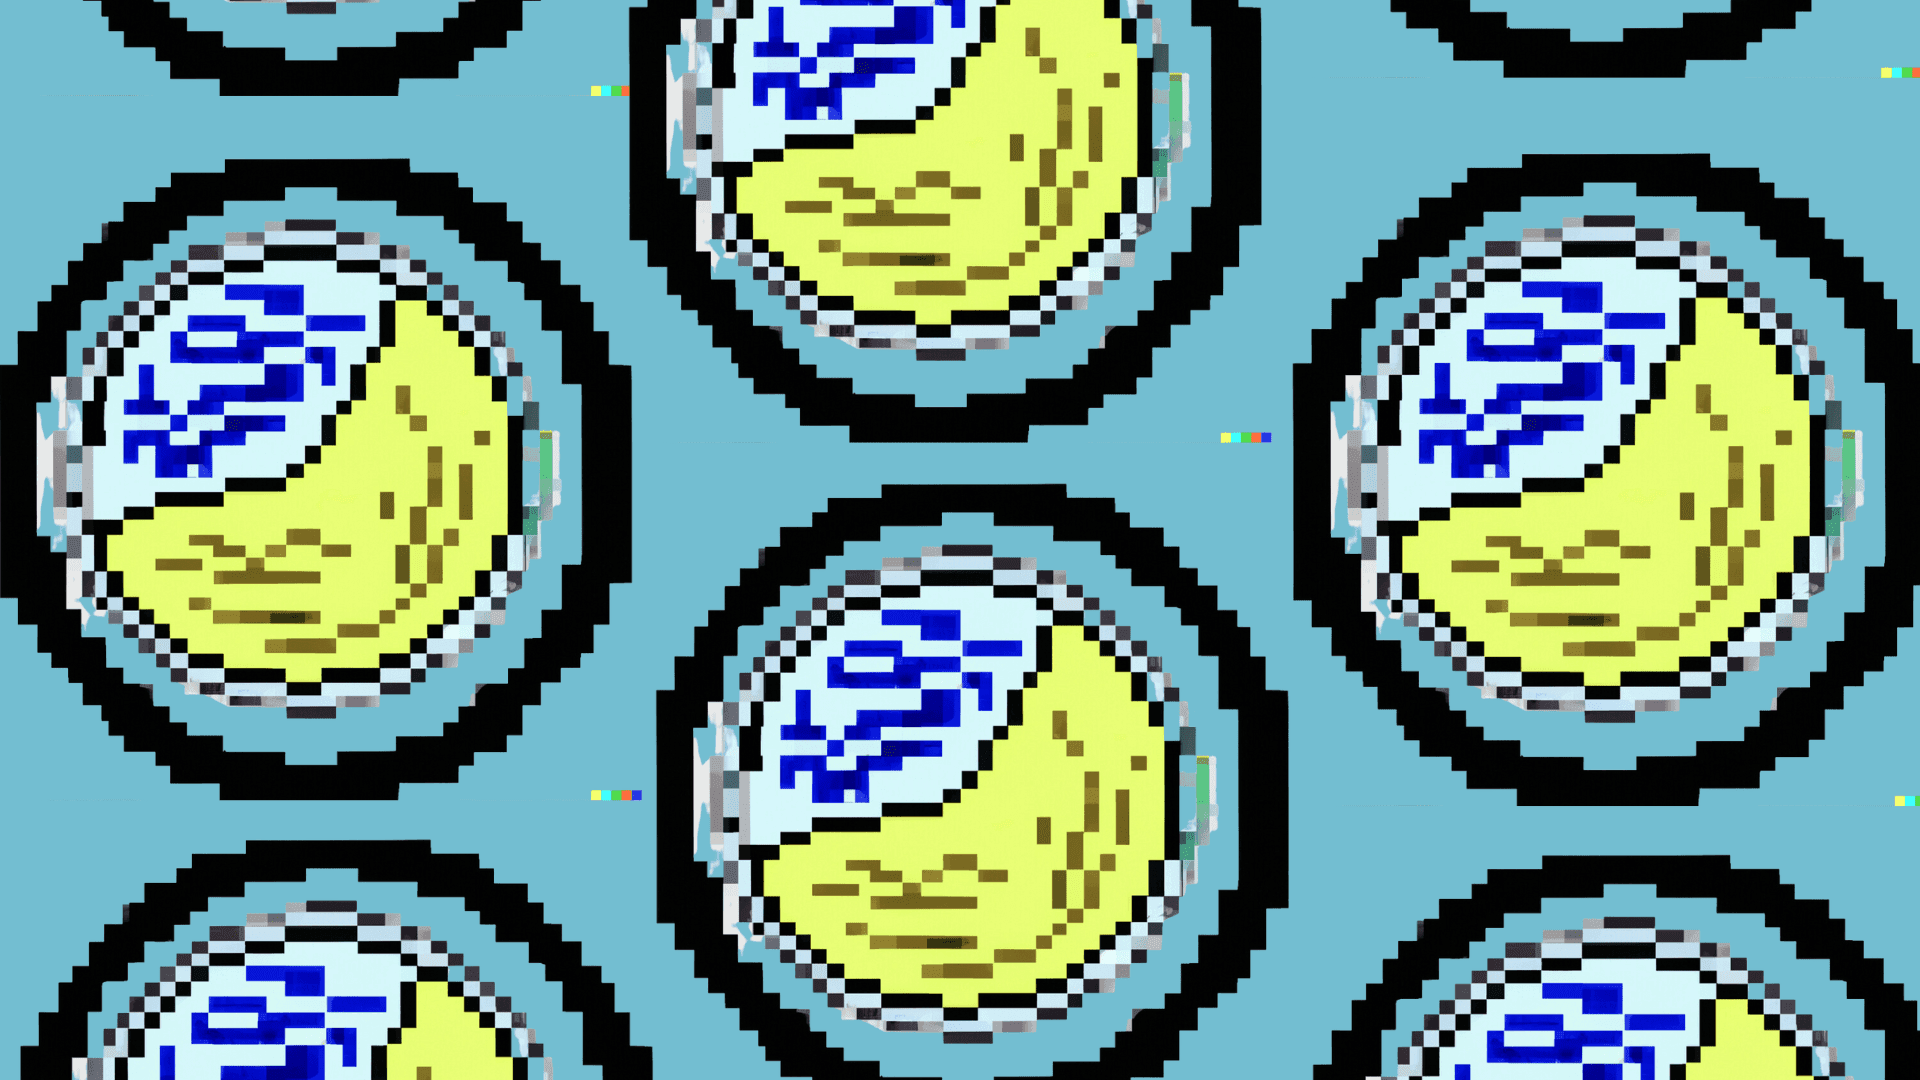 A series of pixelated petri dishes on a blue background